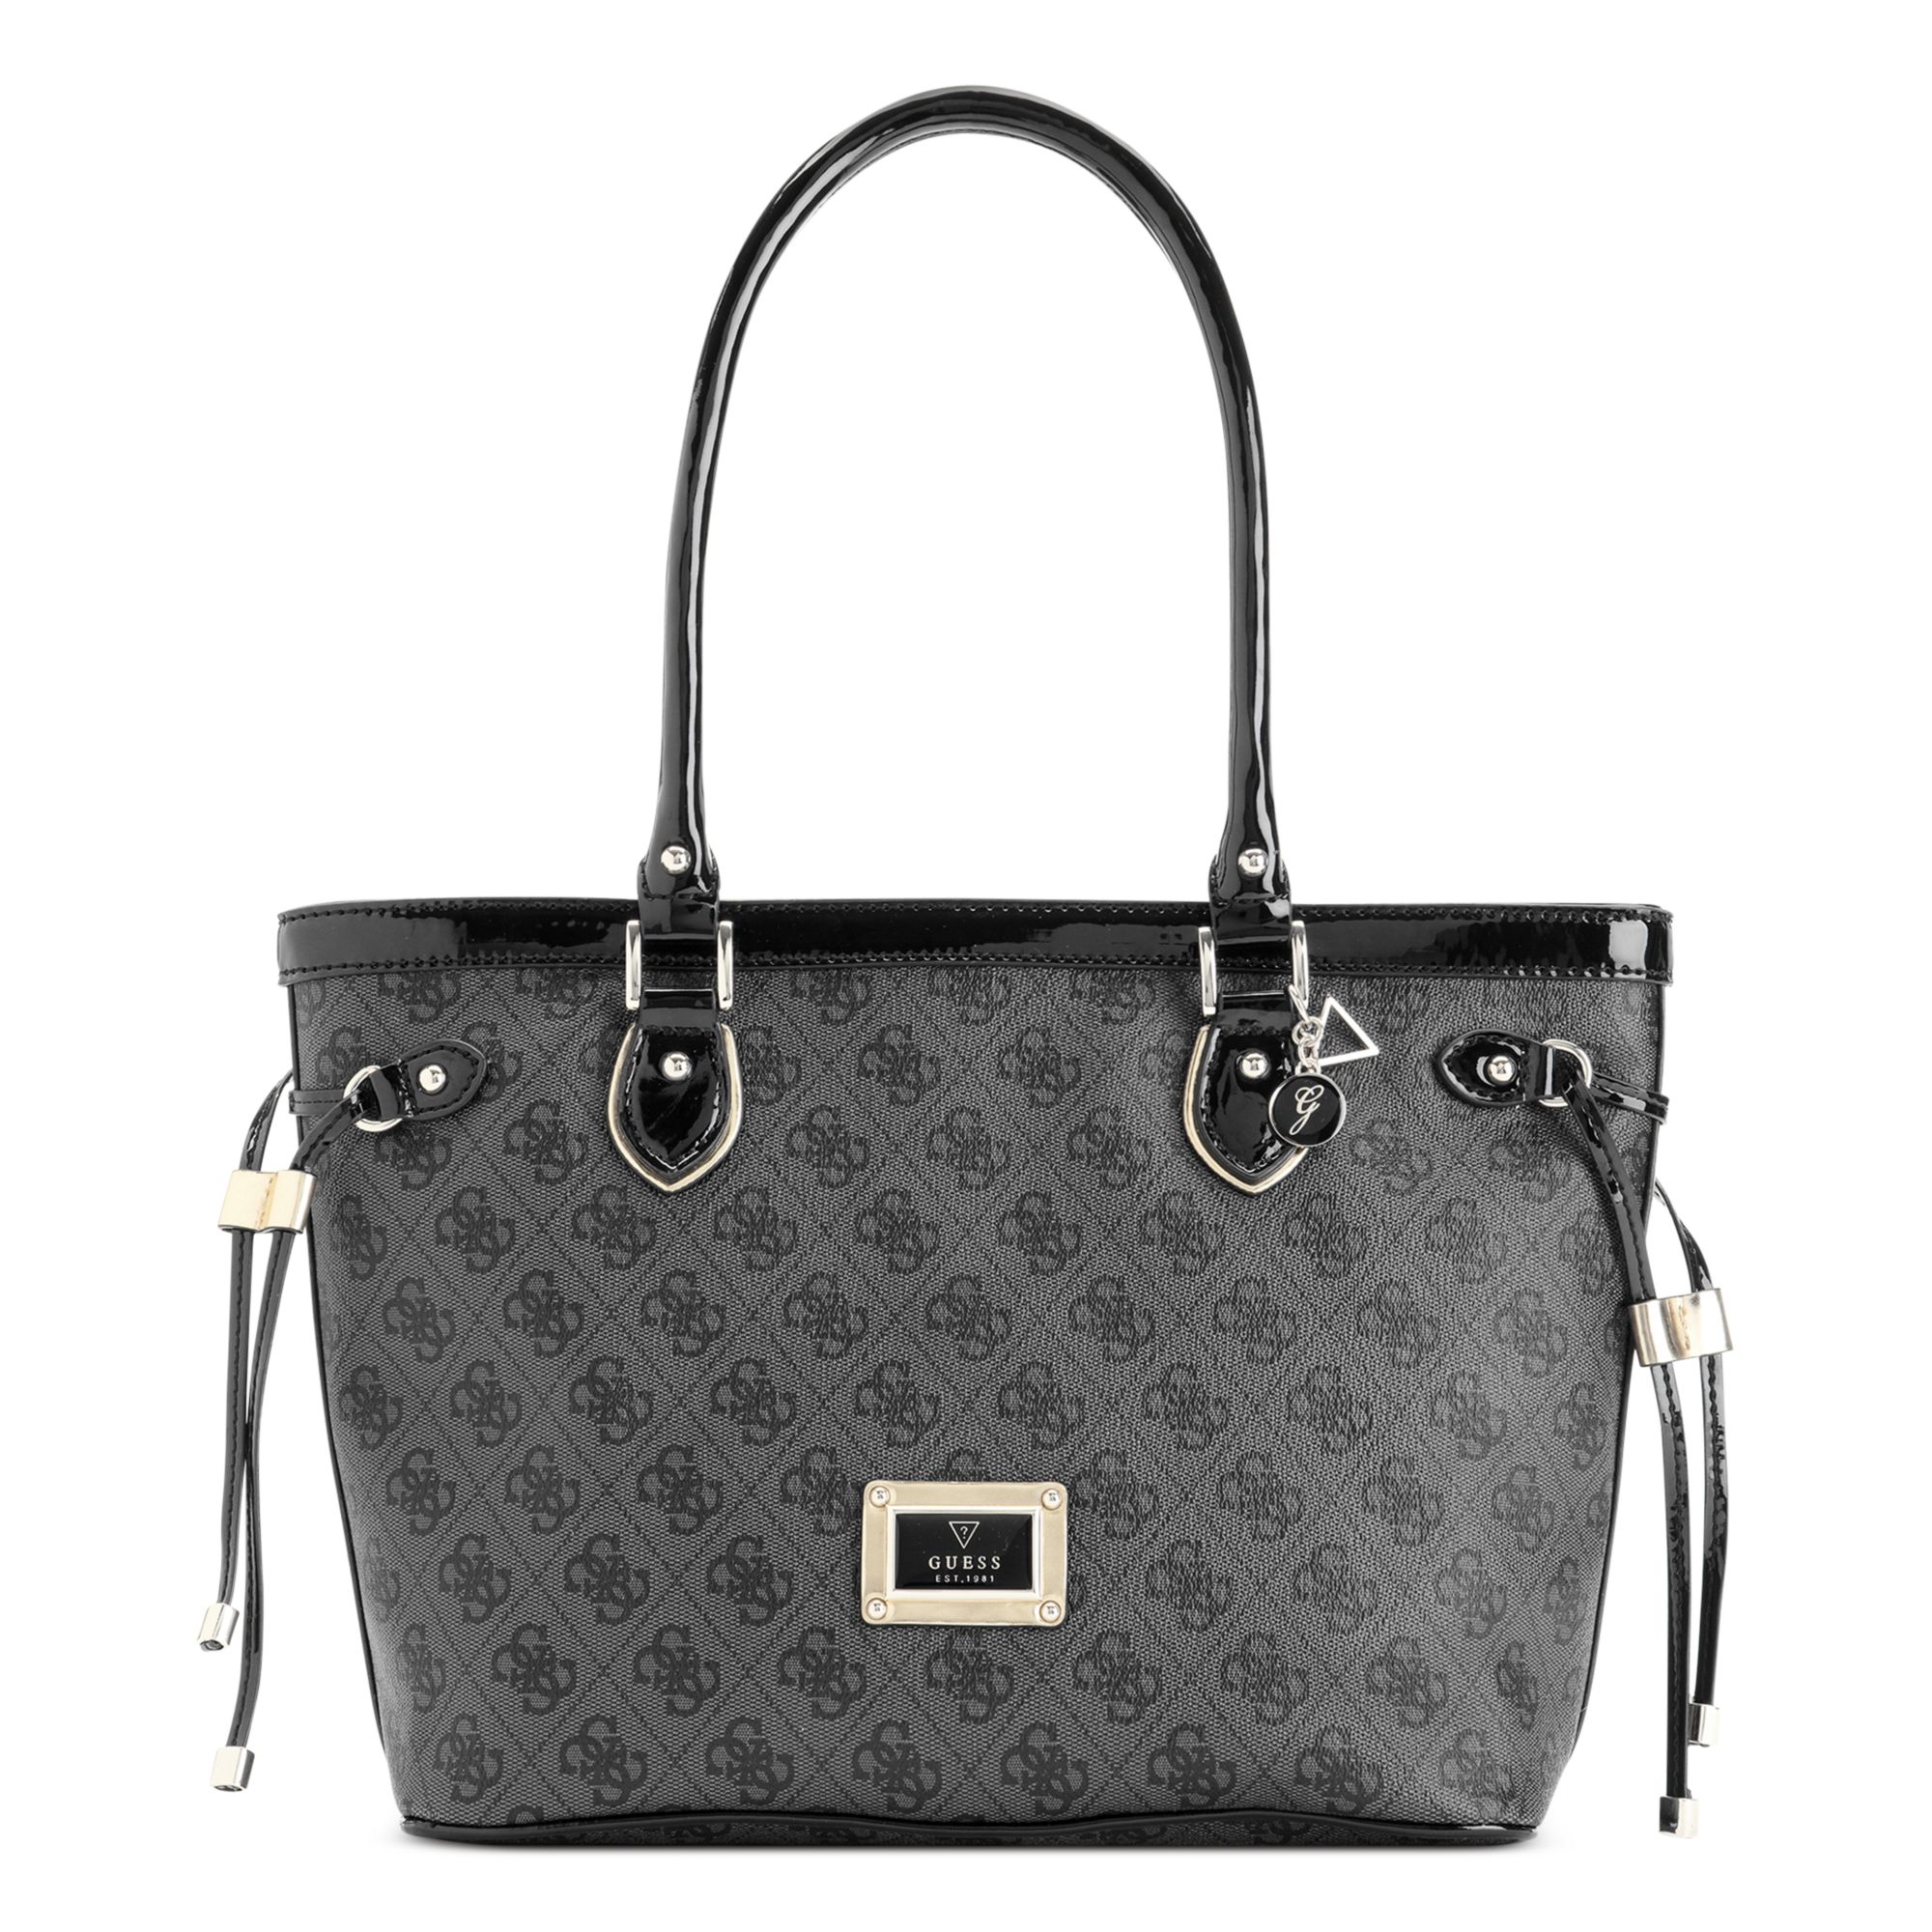 Guess Guess Handbag Reama Small Classic Tote in Gray - Lyst